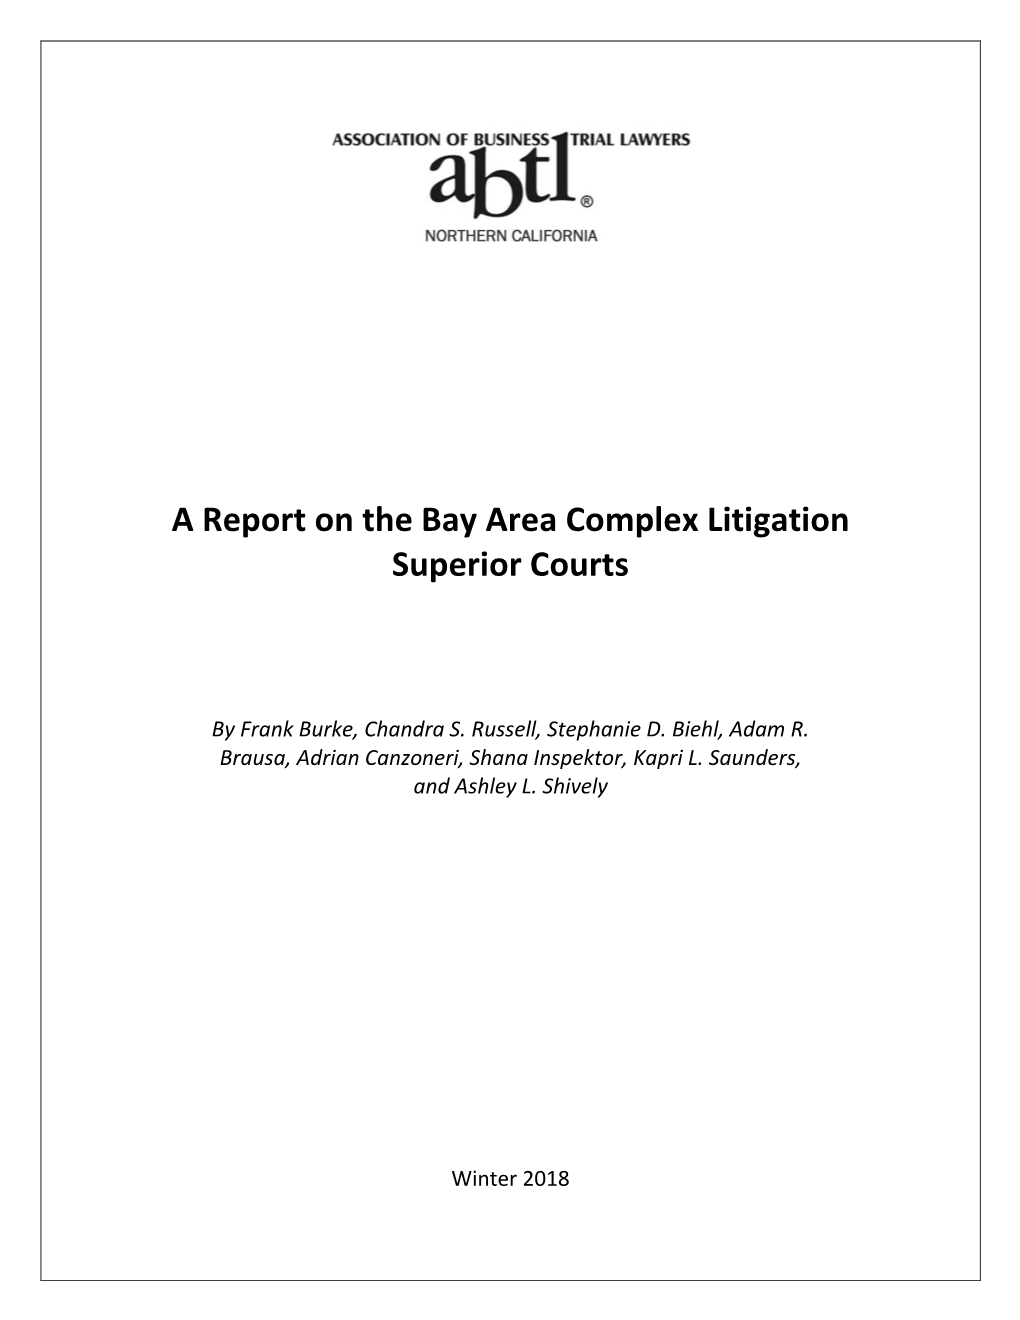 A Report on the Bay Area Complex Litigation Superior Courts